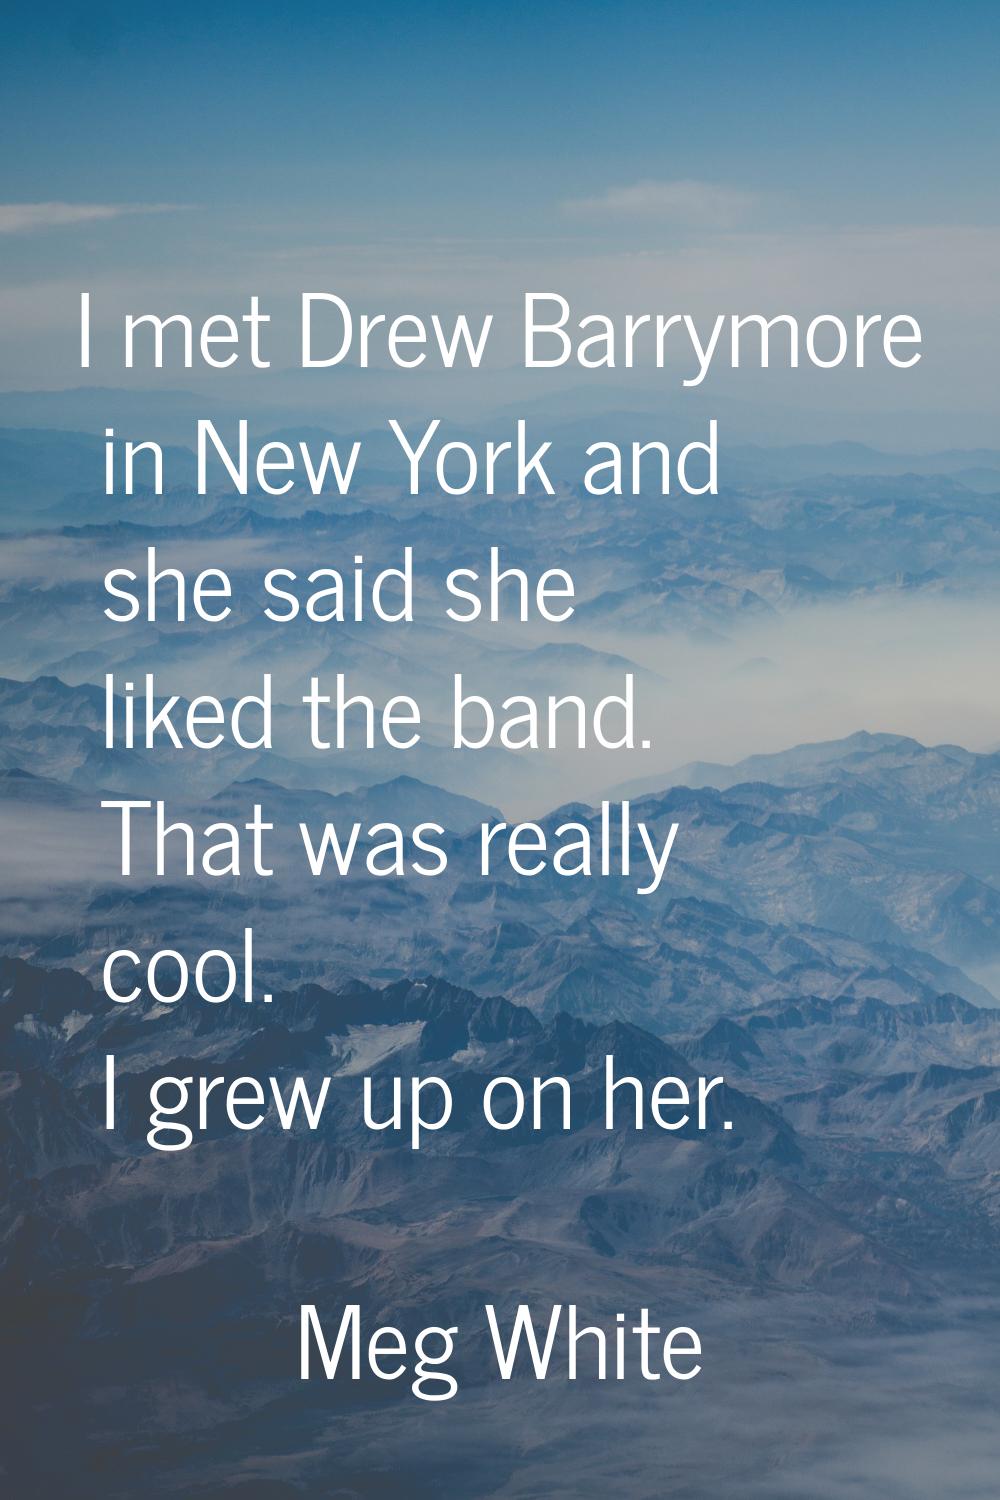 I met Drew Barrymore in New York and she said she liked the band. That was really cool. I grew up o